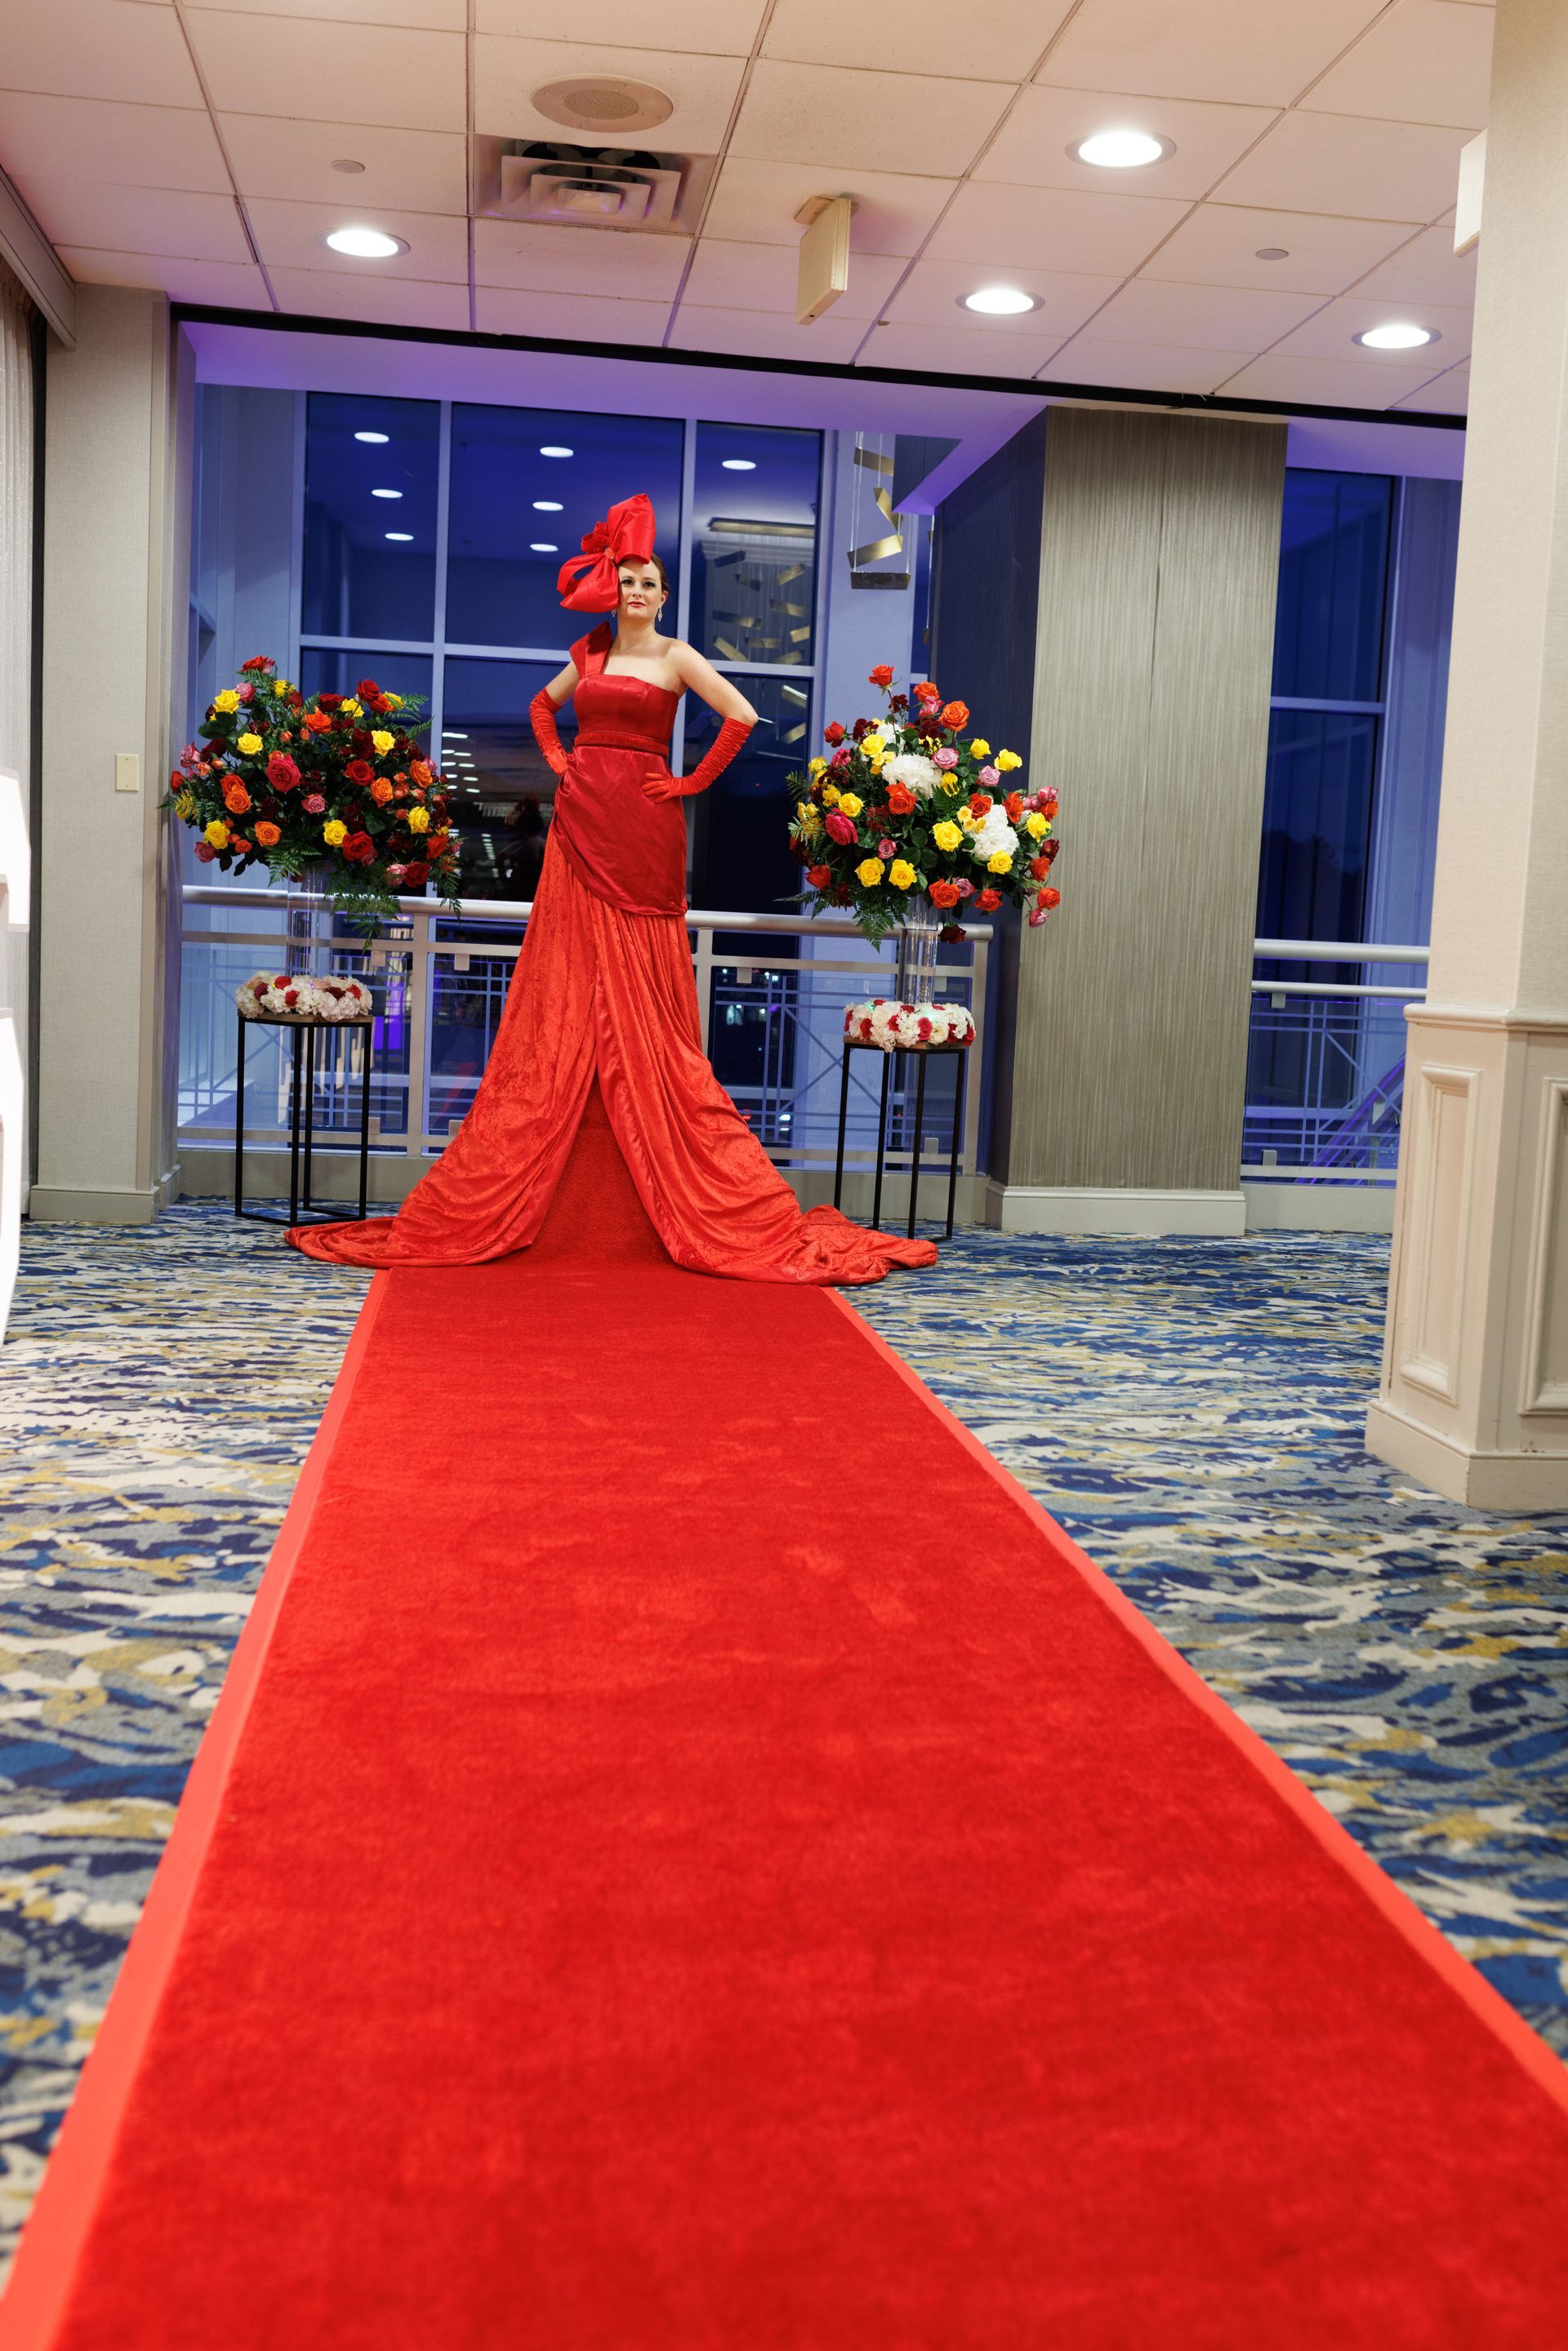 A woman in a red dress is walking down a red carpet.